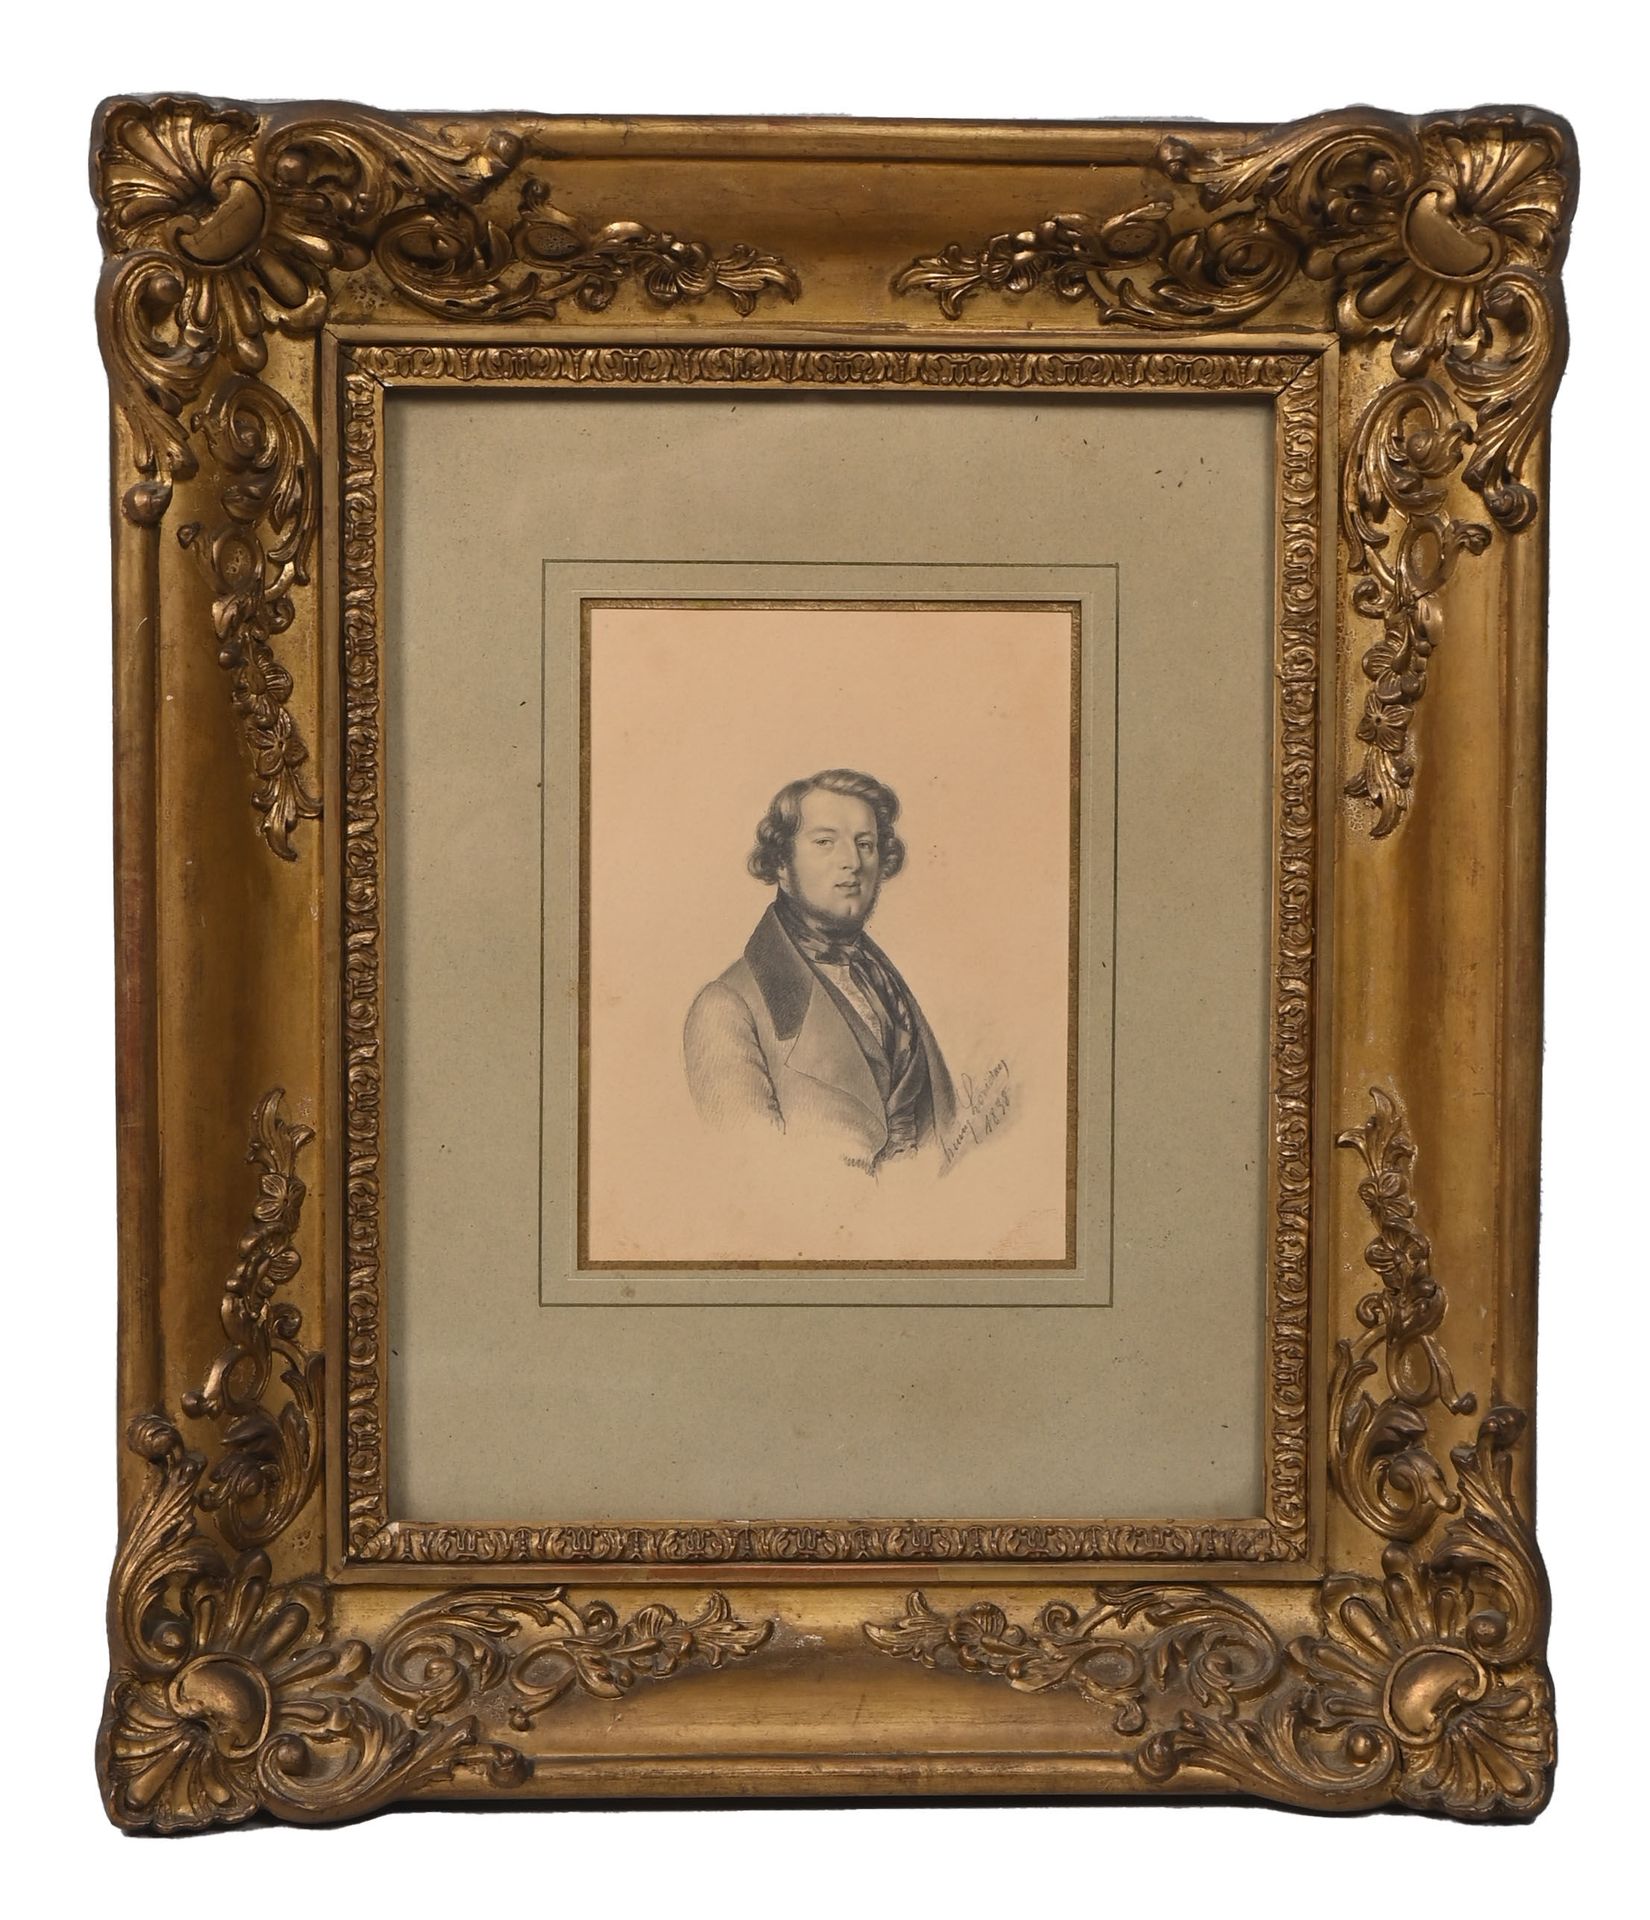 Null Henry LORIDAY (19th century)
Portrait of a man
Pencil on paper
Signed and d&hellip;